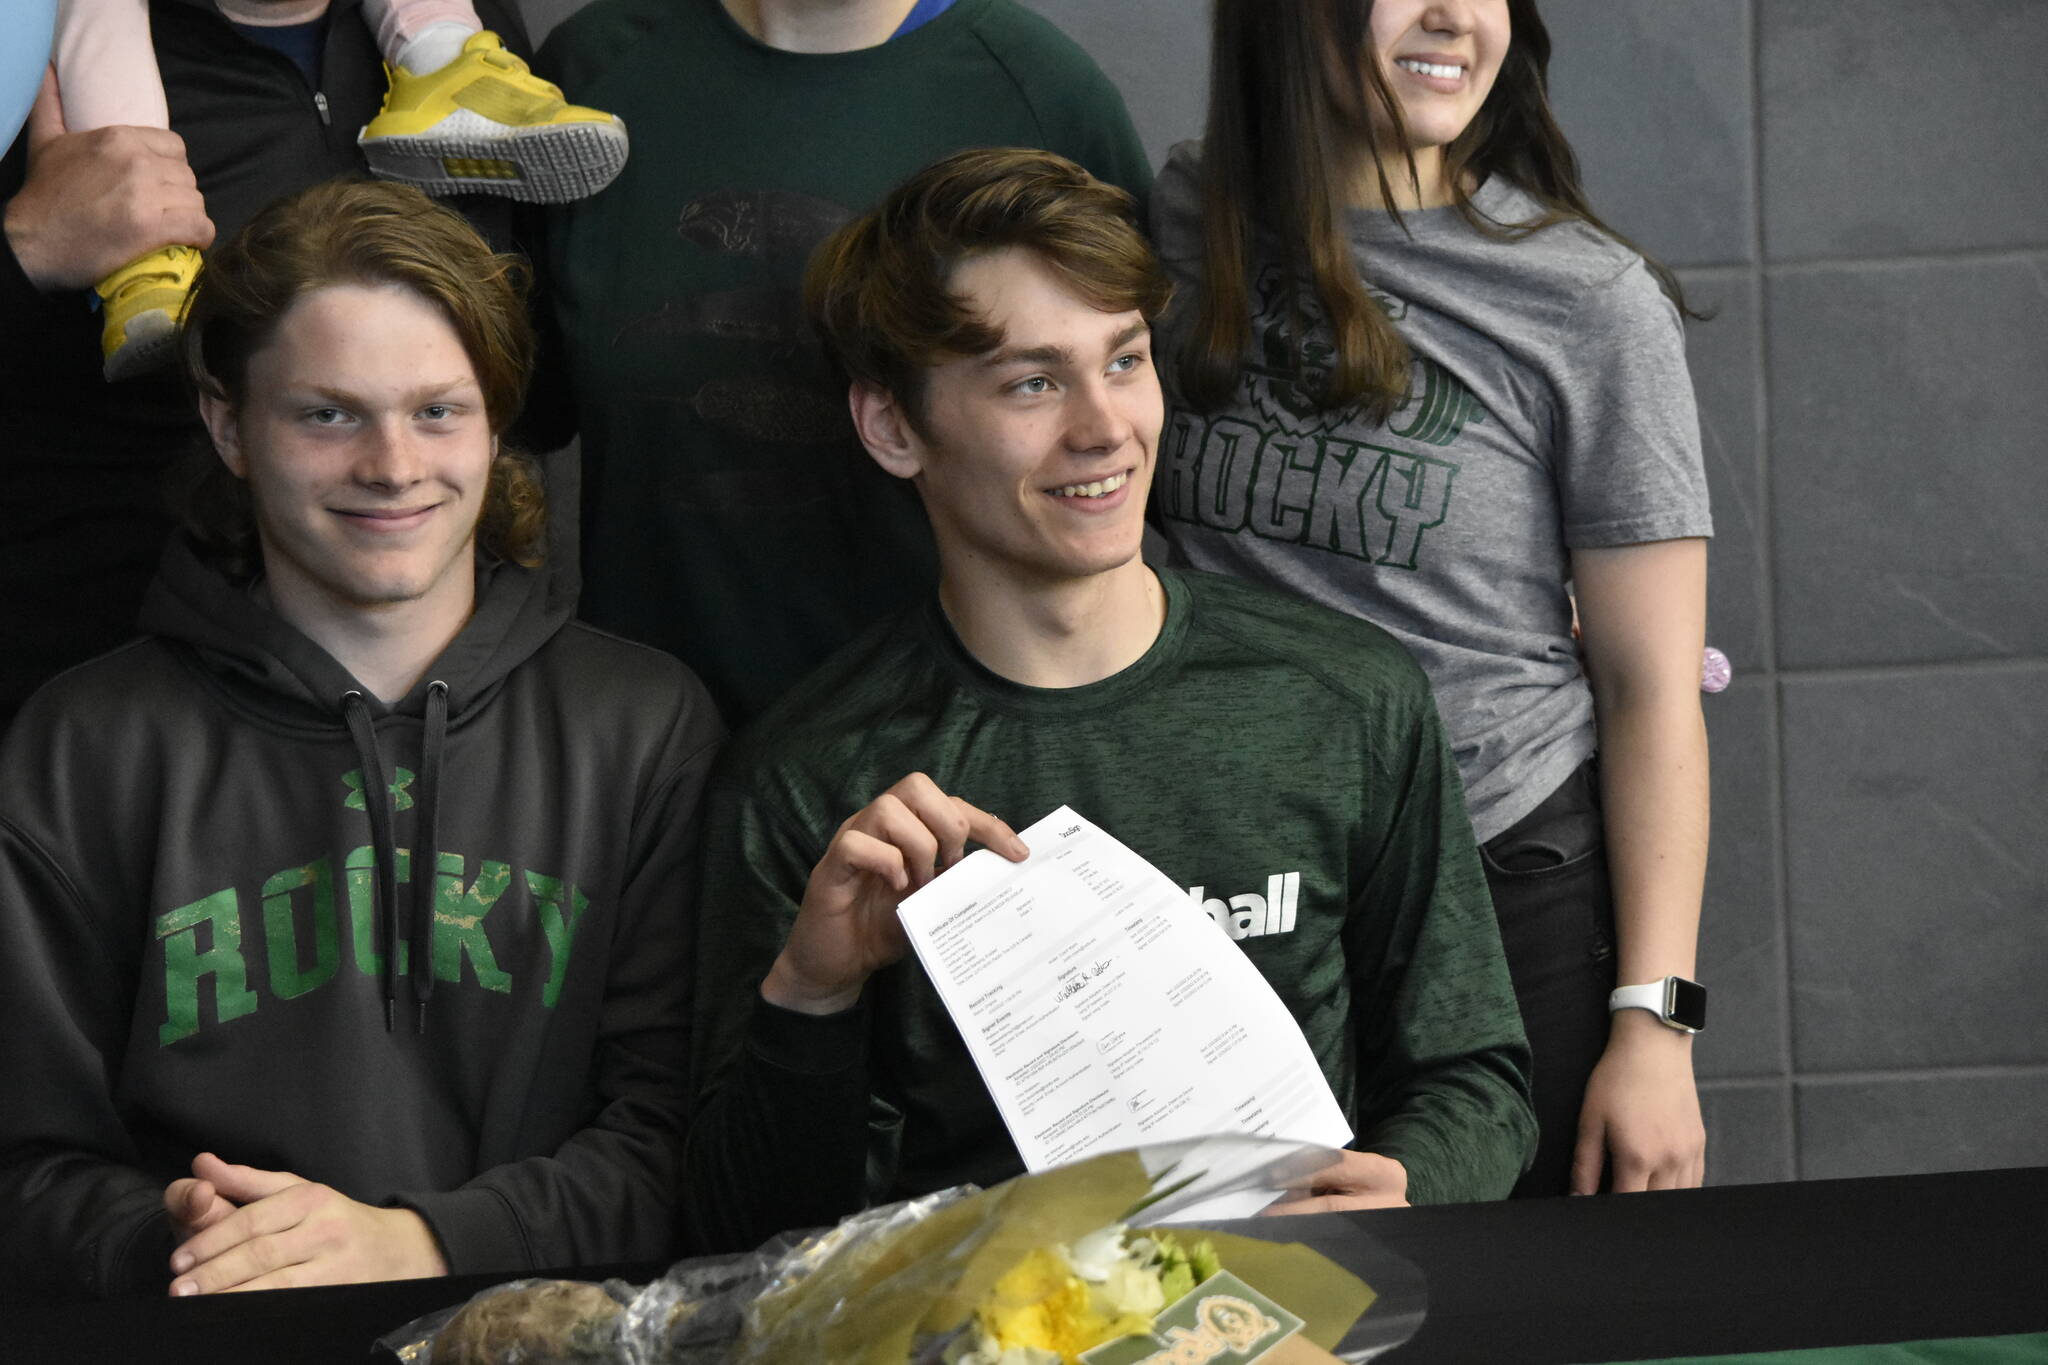 Wallace Adams, center, with his brother Owen, holds up an agreement to play football at Rocky Mountain College in Billings, Montana, during a signing ceremony at Thunder Mountain High School on Wednesday. Adams told the Empire he was grateful to his parents for their support. “They’ve always supported me in everything I’ve done.”